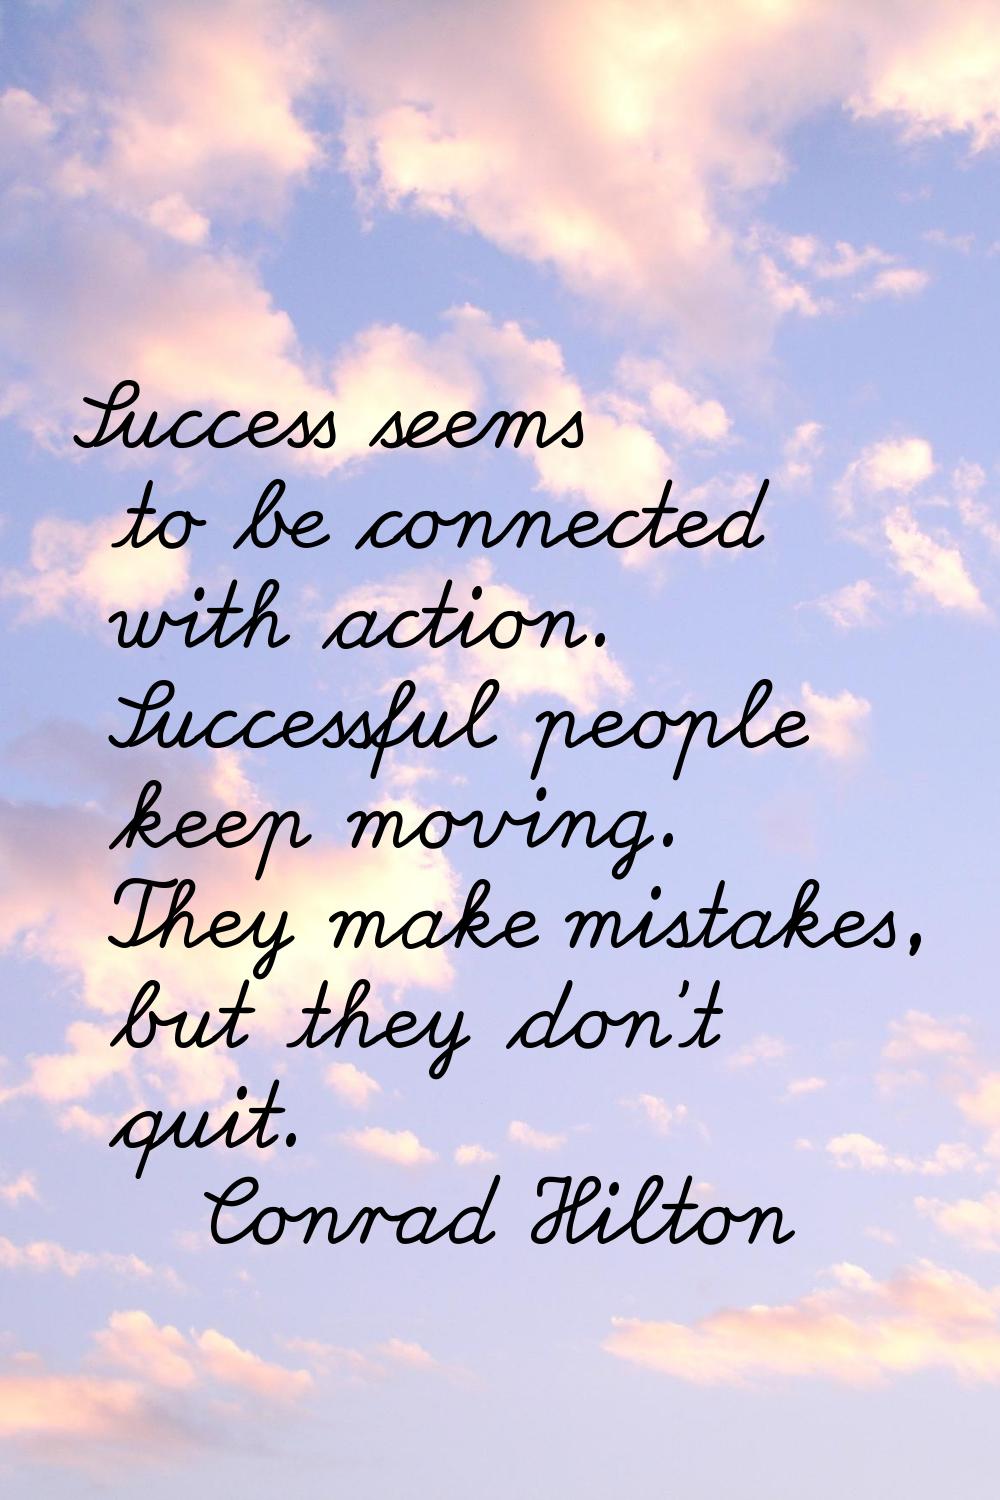 Success seems to be connected with action. Successful people keep moving. They make mistakes, but t